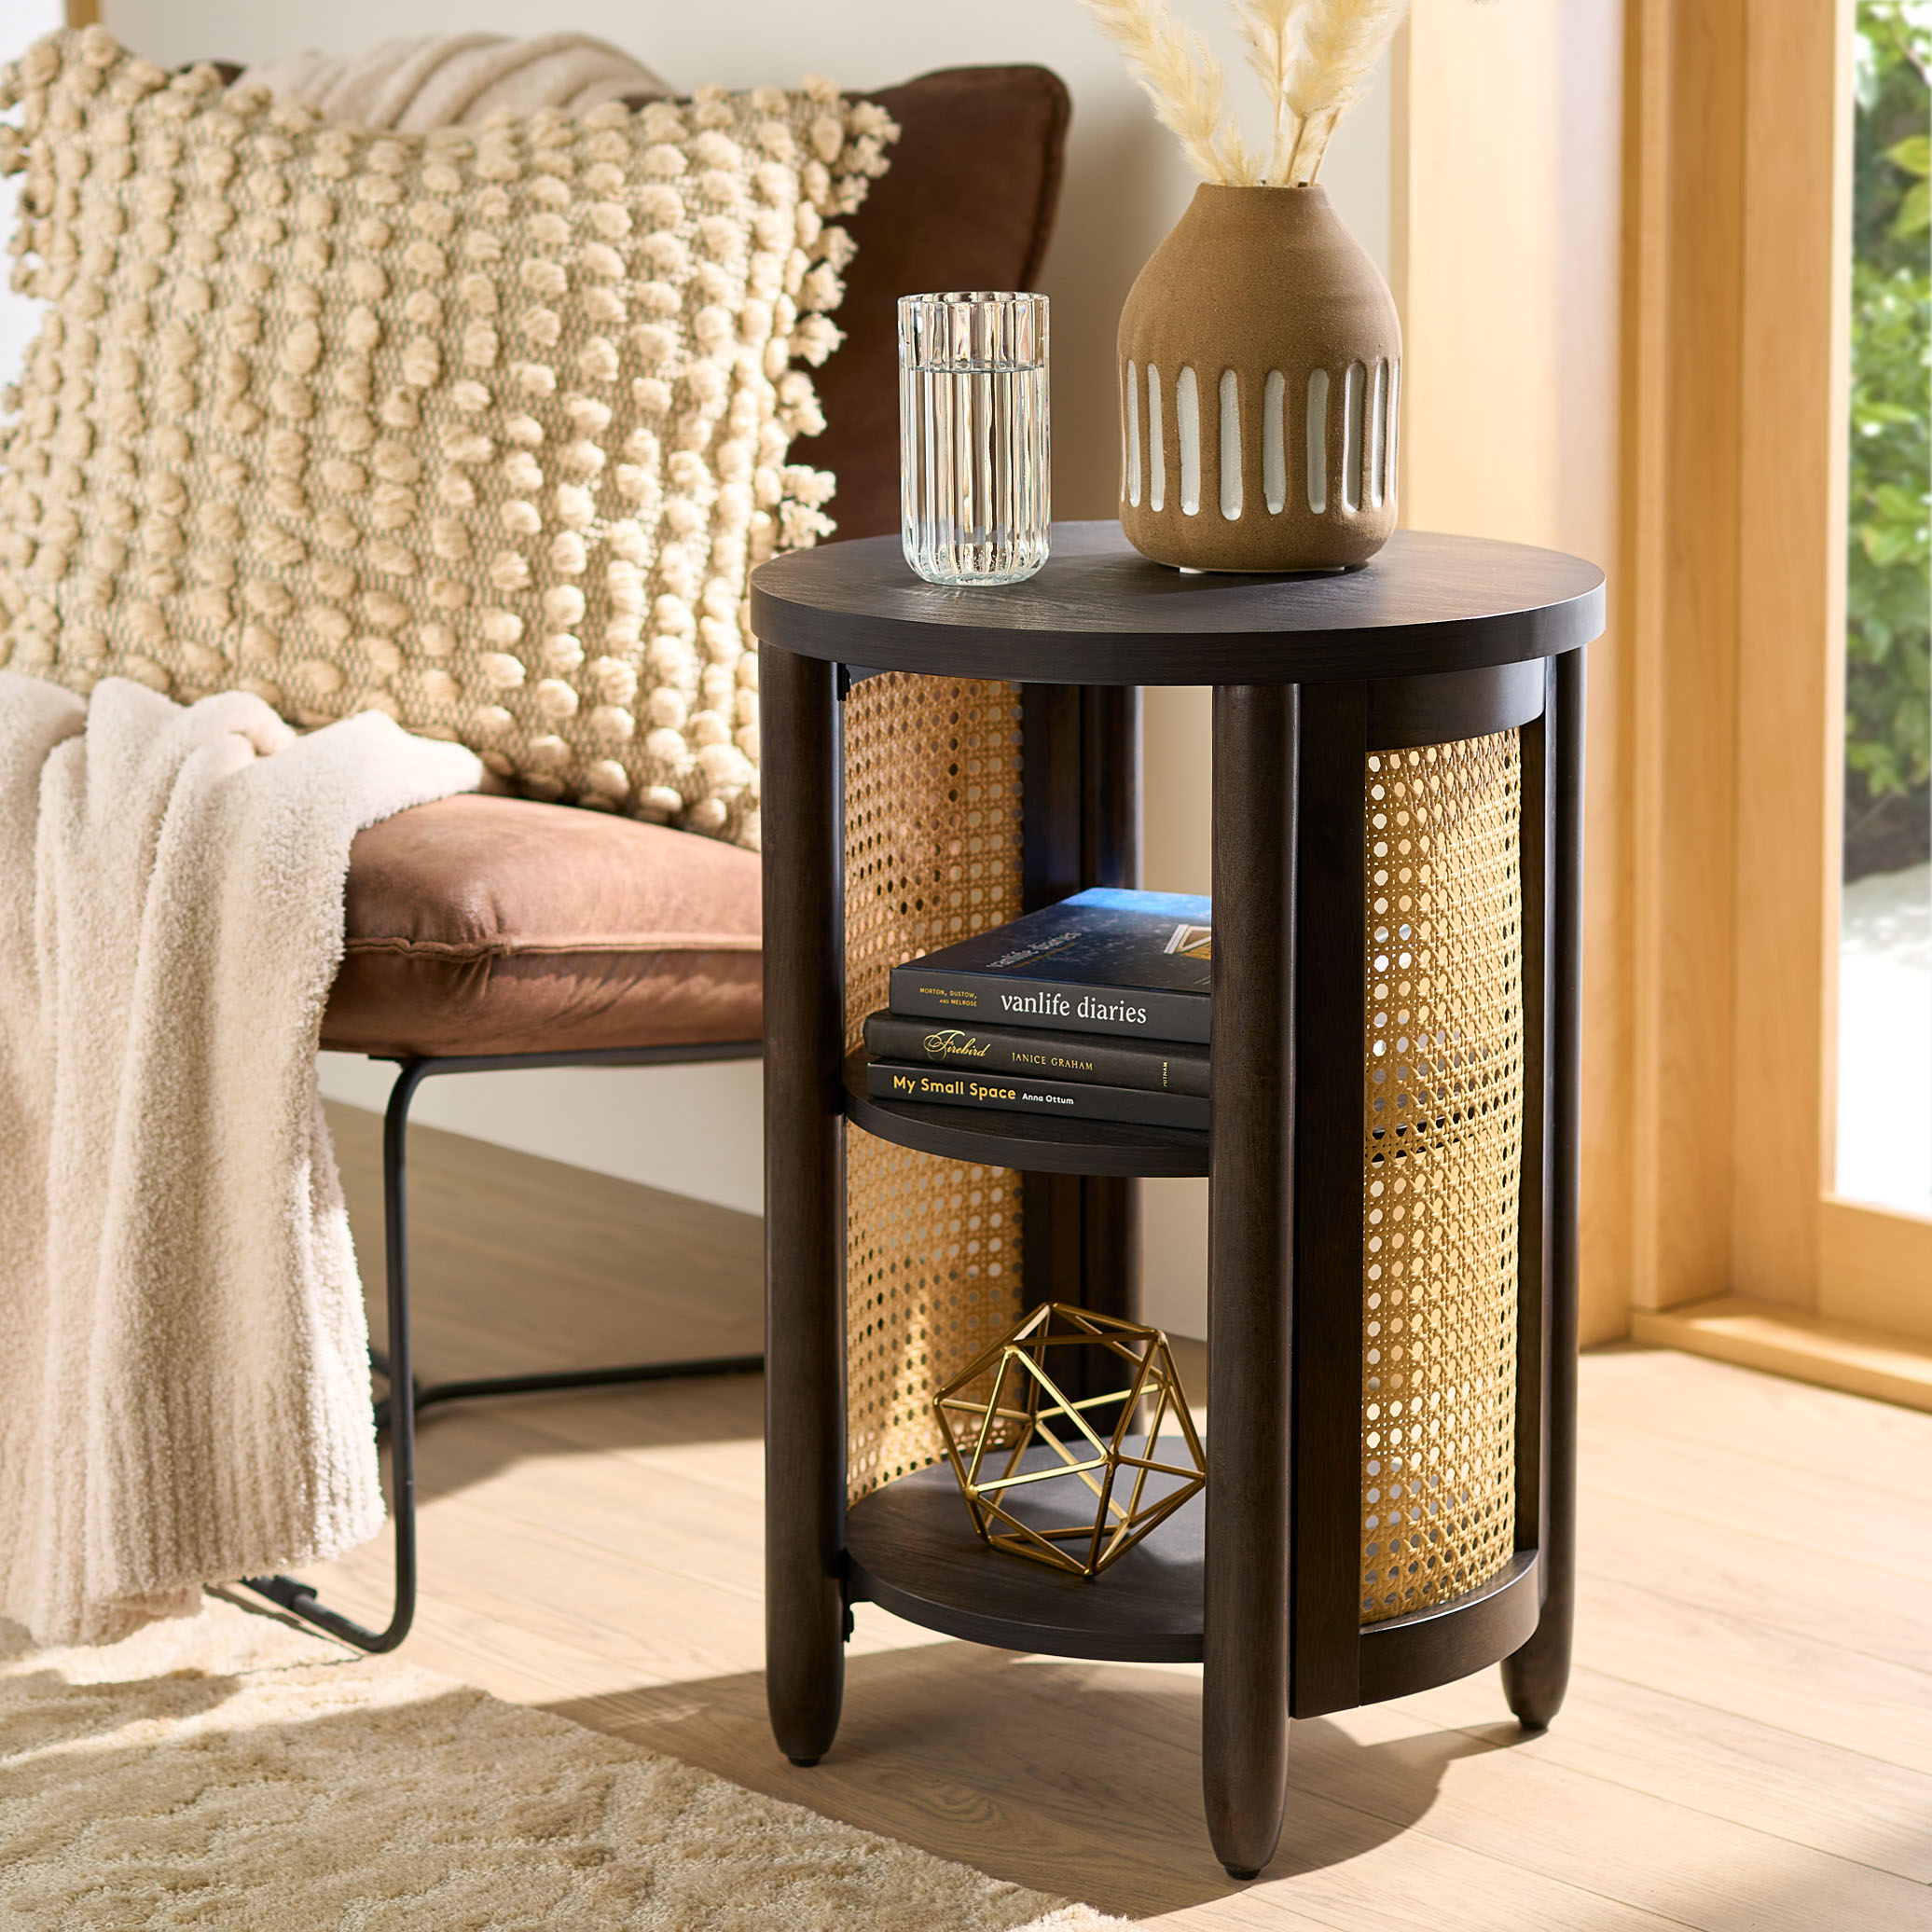 Better Homes & Gardens Springwood Caning Side Table, Charcoal Finish, Size: 17.0 inch Large X 17.0 inch W X 24.0 inch H